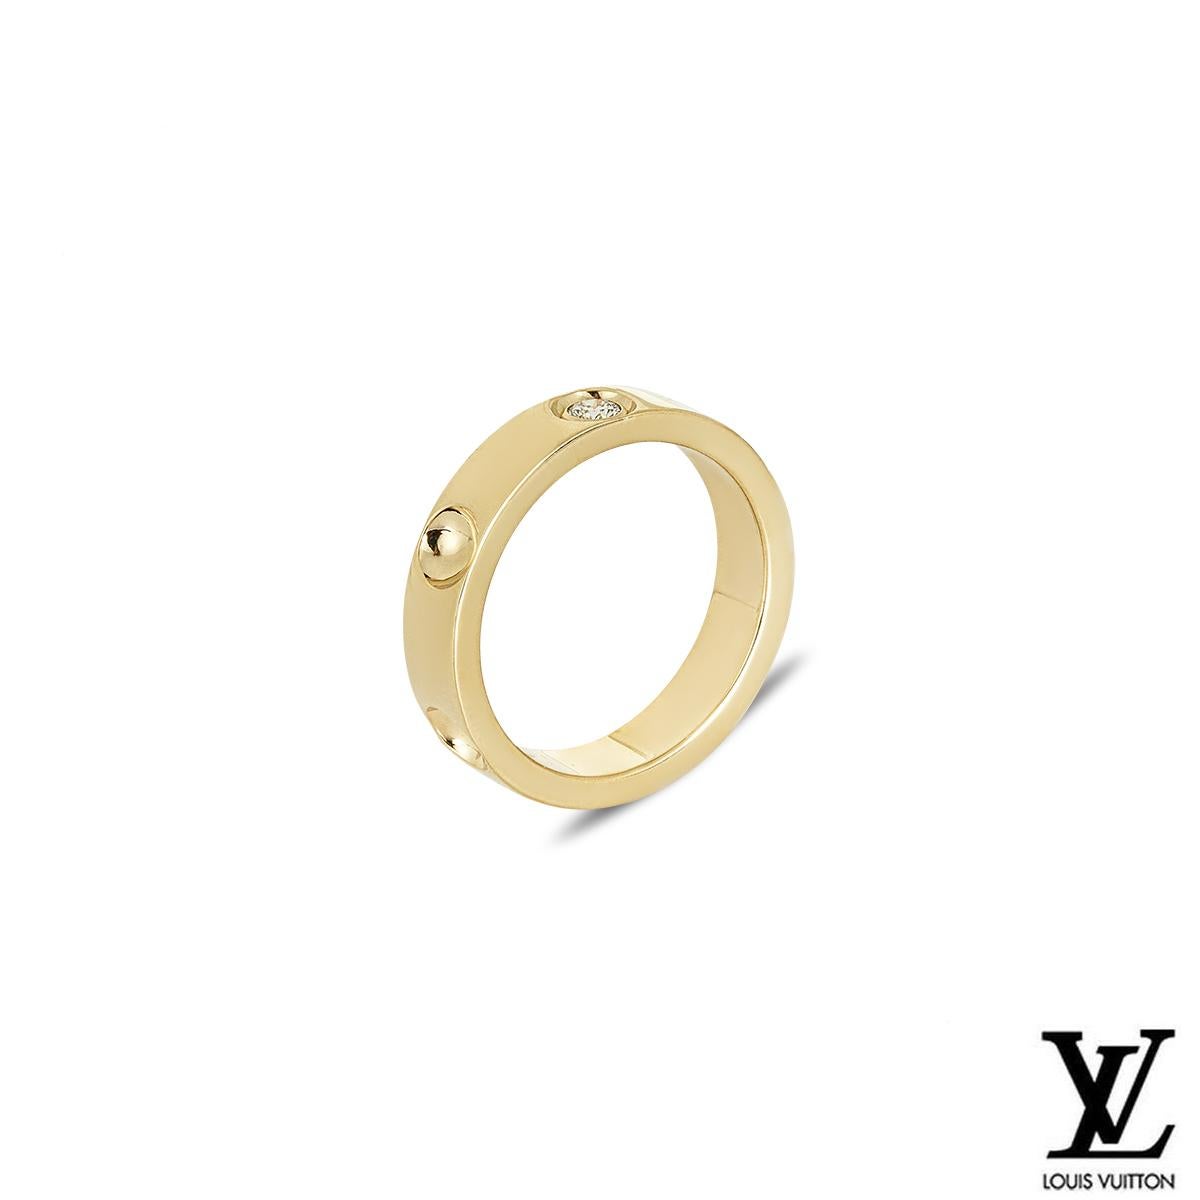 A stunning 18k yellow gold ring from the Empreinte collection by Louis Vuitton. The ring features 5 inverted stud motifs, one engraved with the Louis Vuitton logo. The ring is set with a single round cut diamond, weighing approximately 0.10ct. The